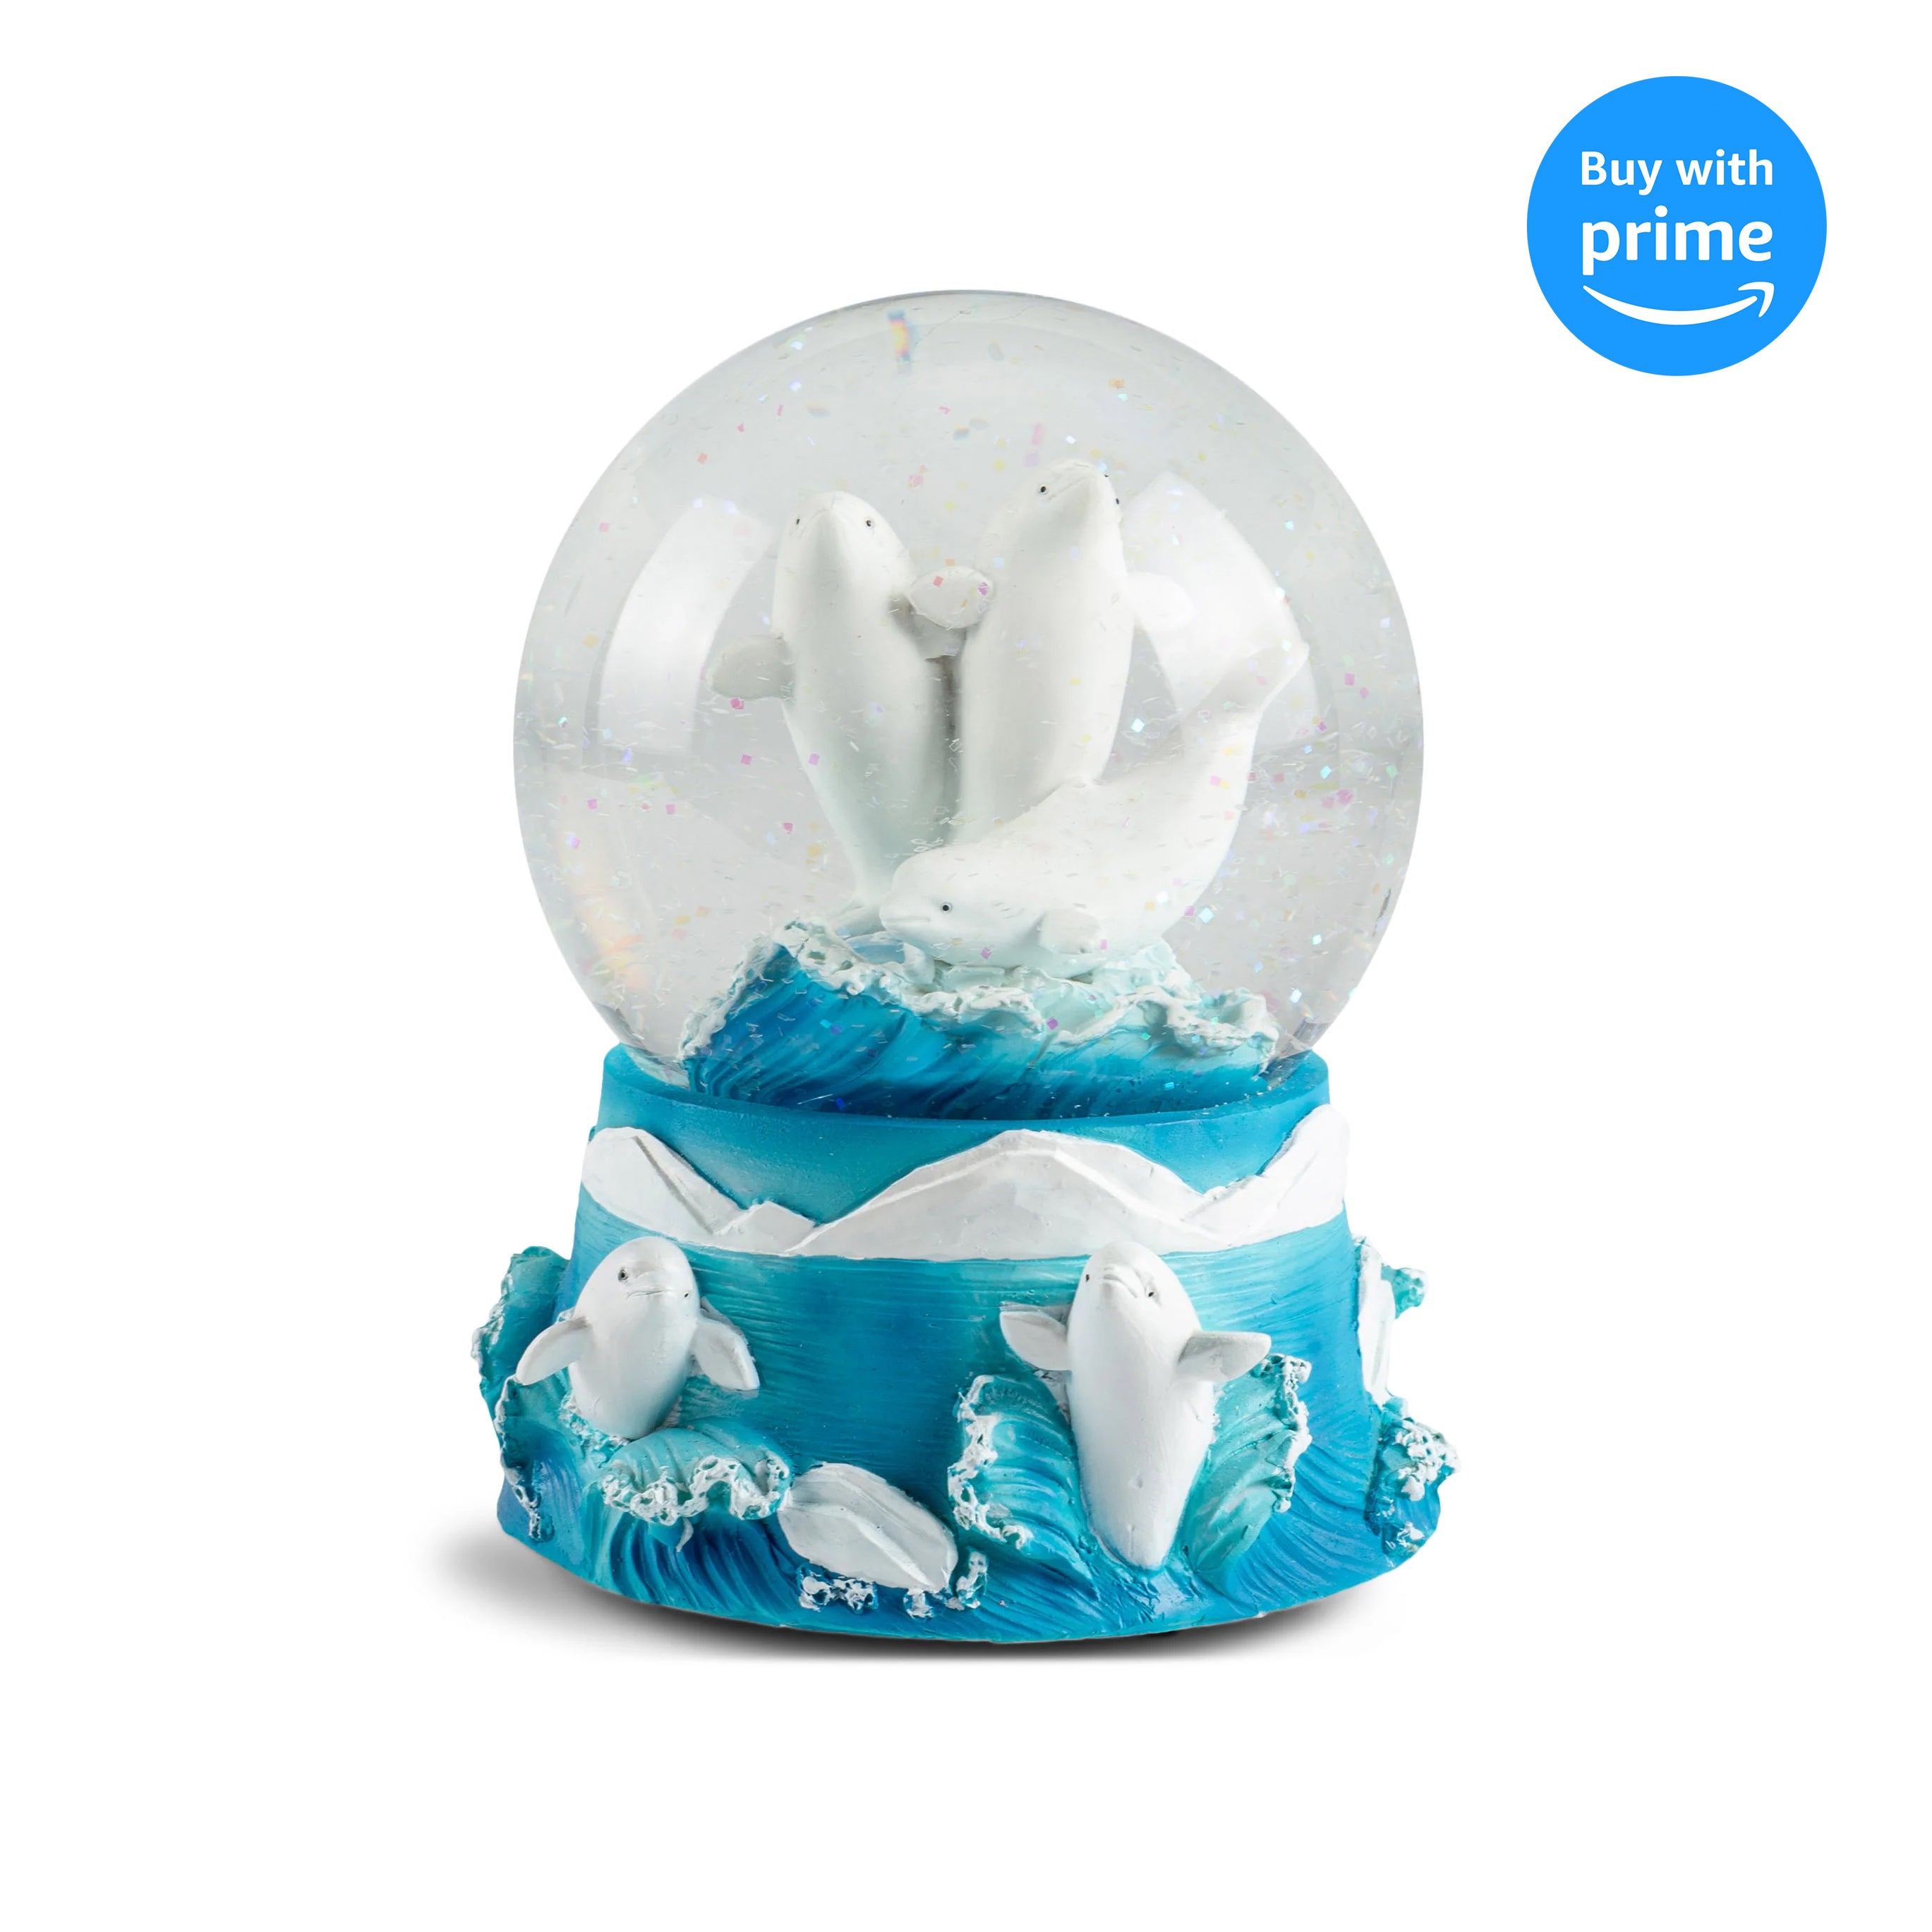 Beluga Whales Figurine 100mm Water Globe Plays Tune Let Me Call You Sweetheart